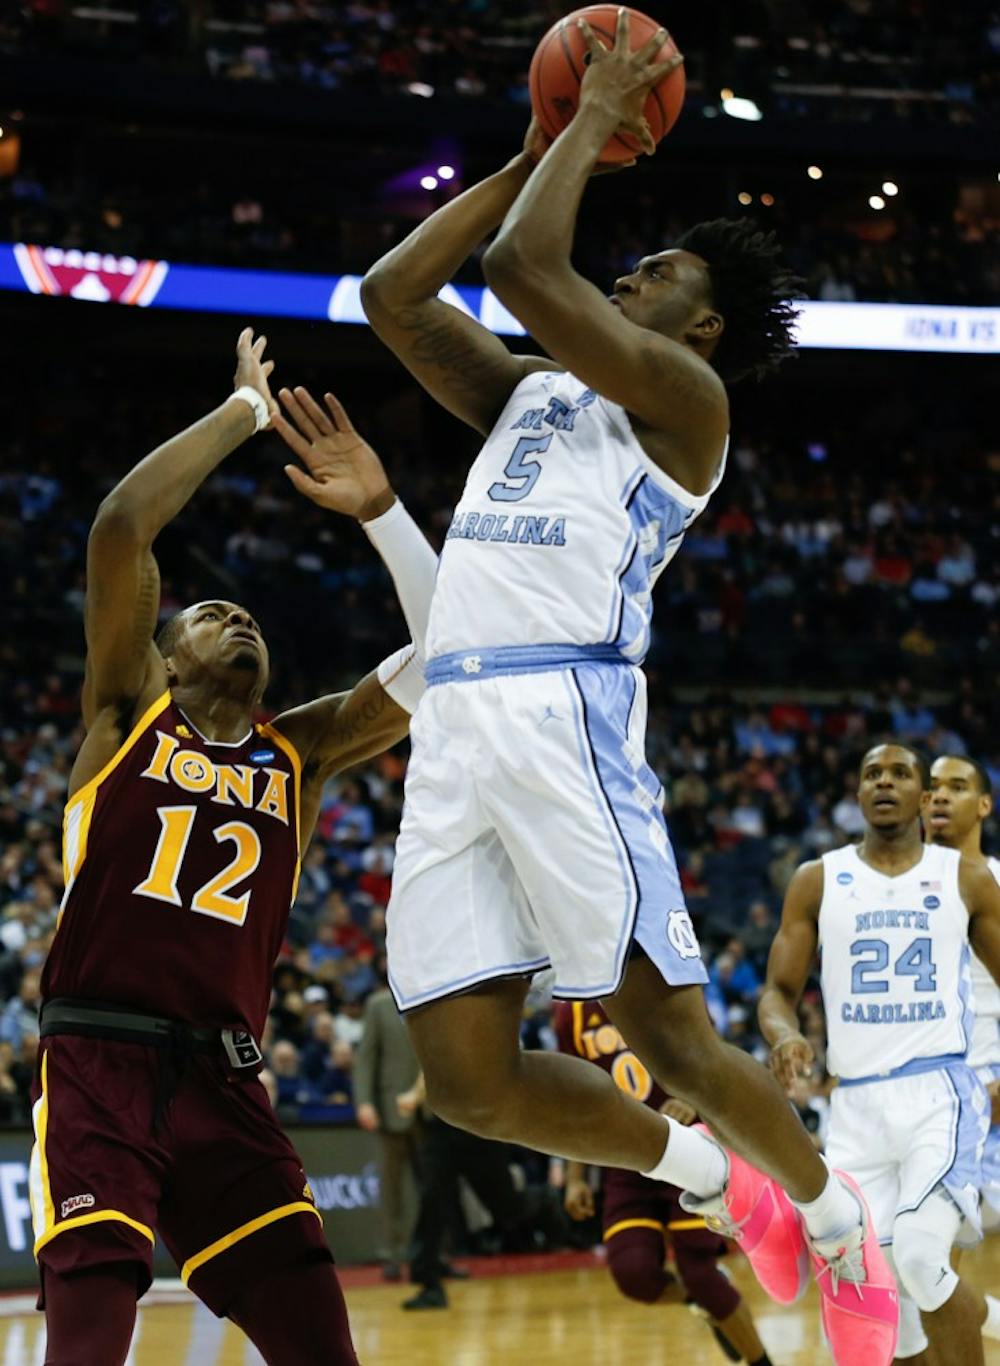 First-year forward Nassir Little (5) takes a shot during the first round of the NCAA Championship against Iona at Nationwide Arena in Columbus, Ohio on Friday, March 22, 2019.